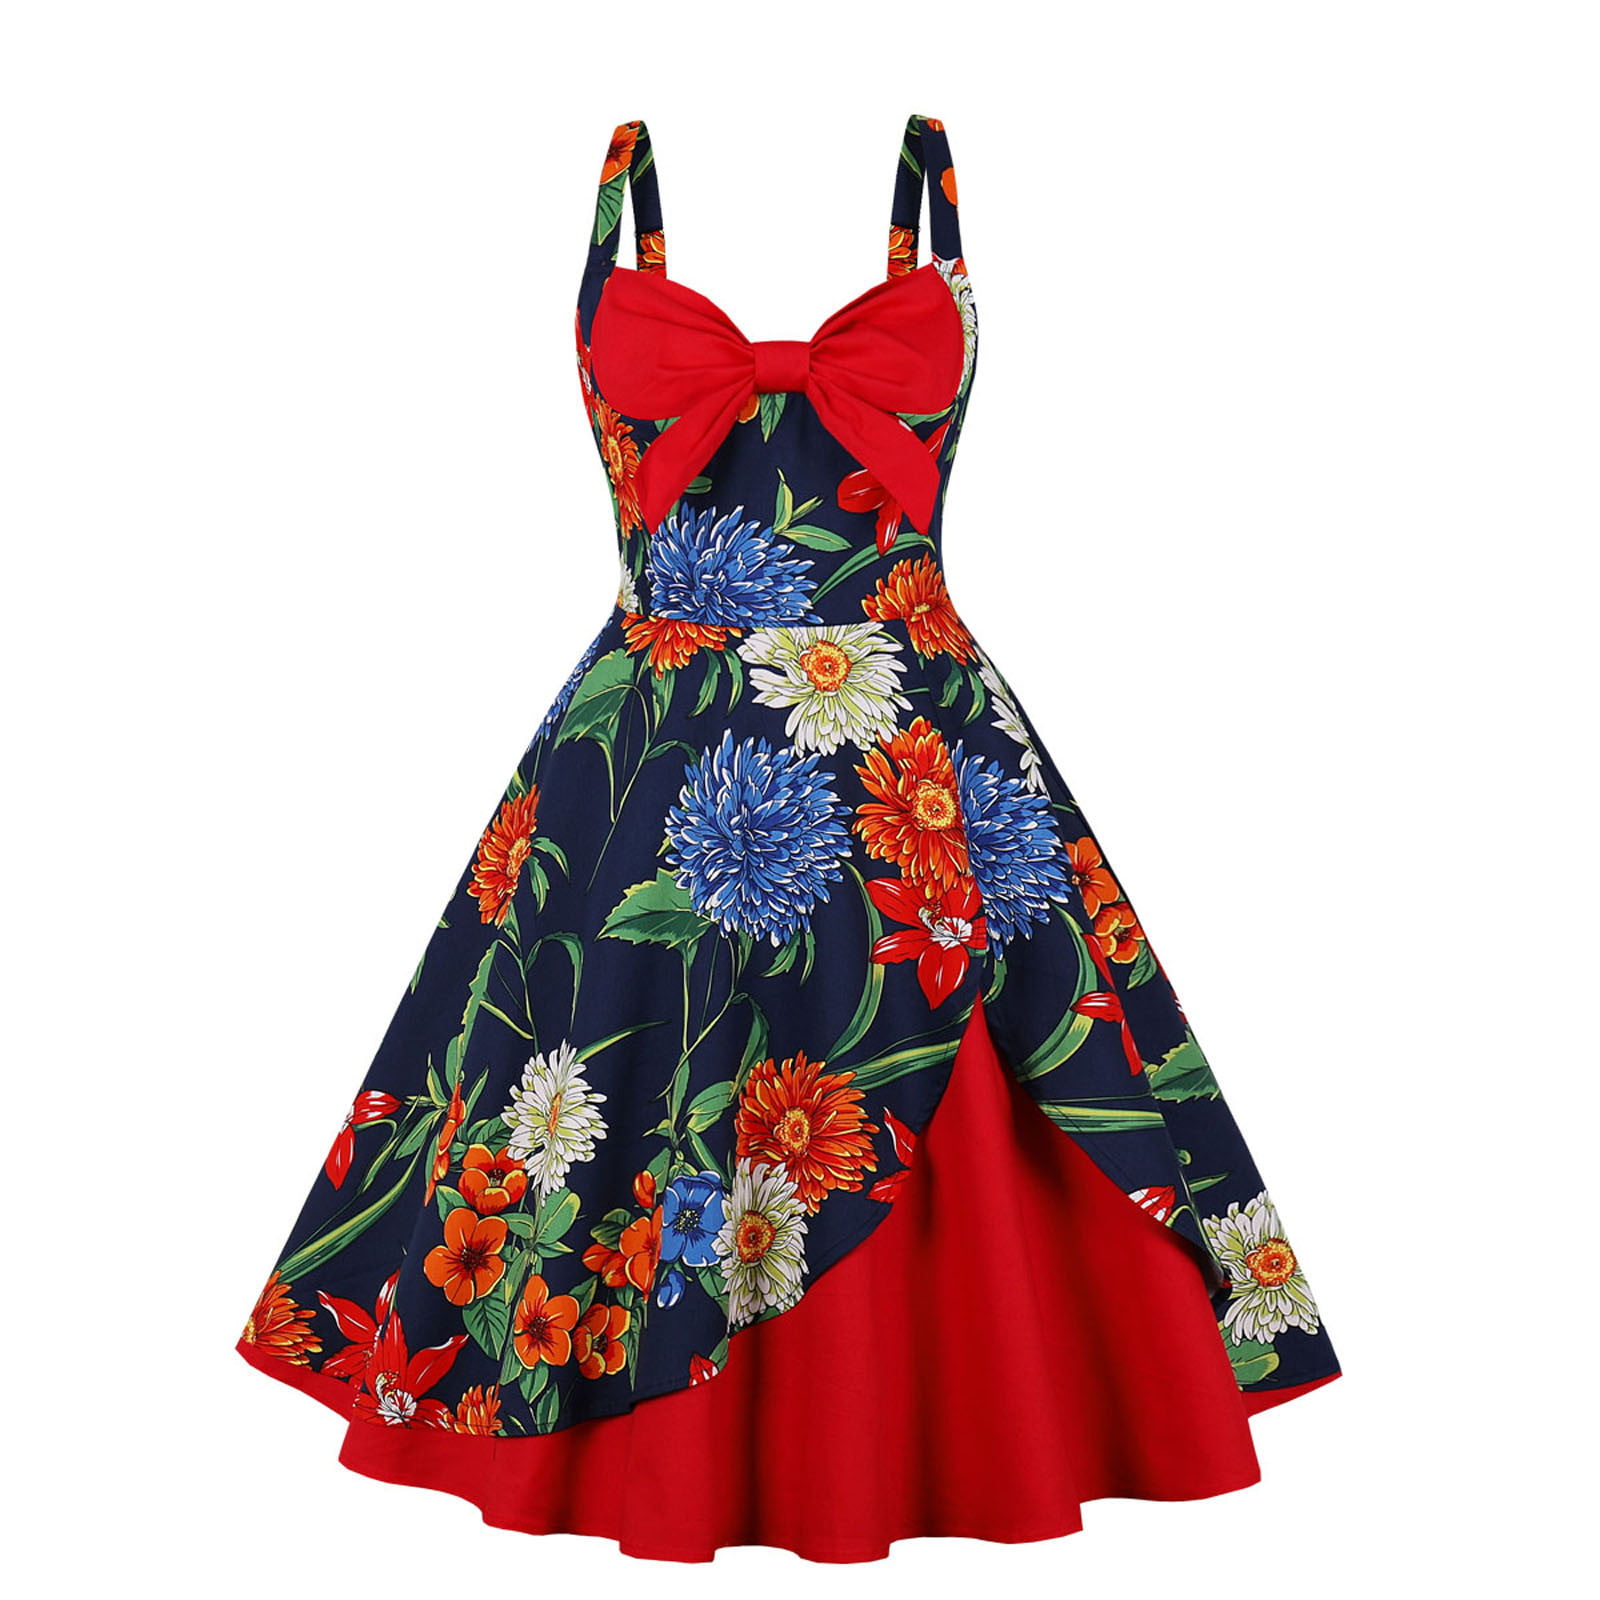 Women Vintage Dress 1950s Classic Print Sleeveless Summer Casual Floral Adjustable-Strappy Party Swing Dress Size S-2XL 